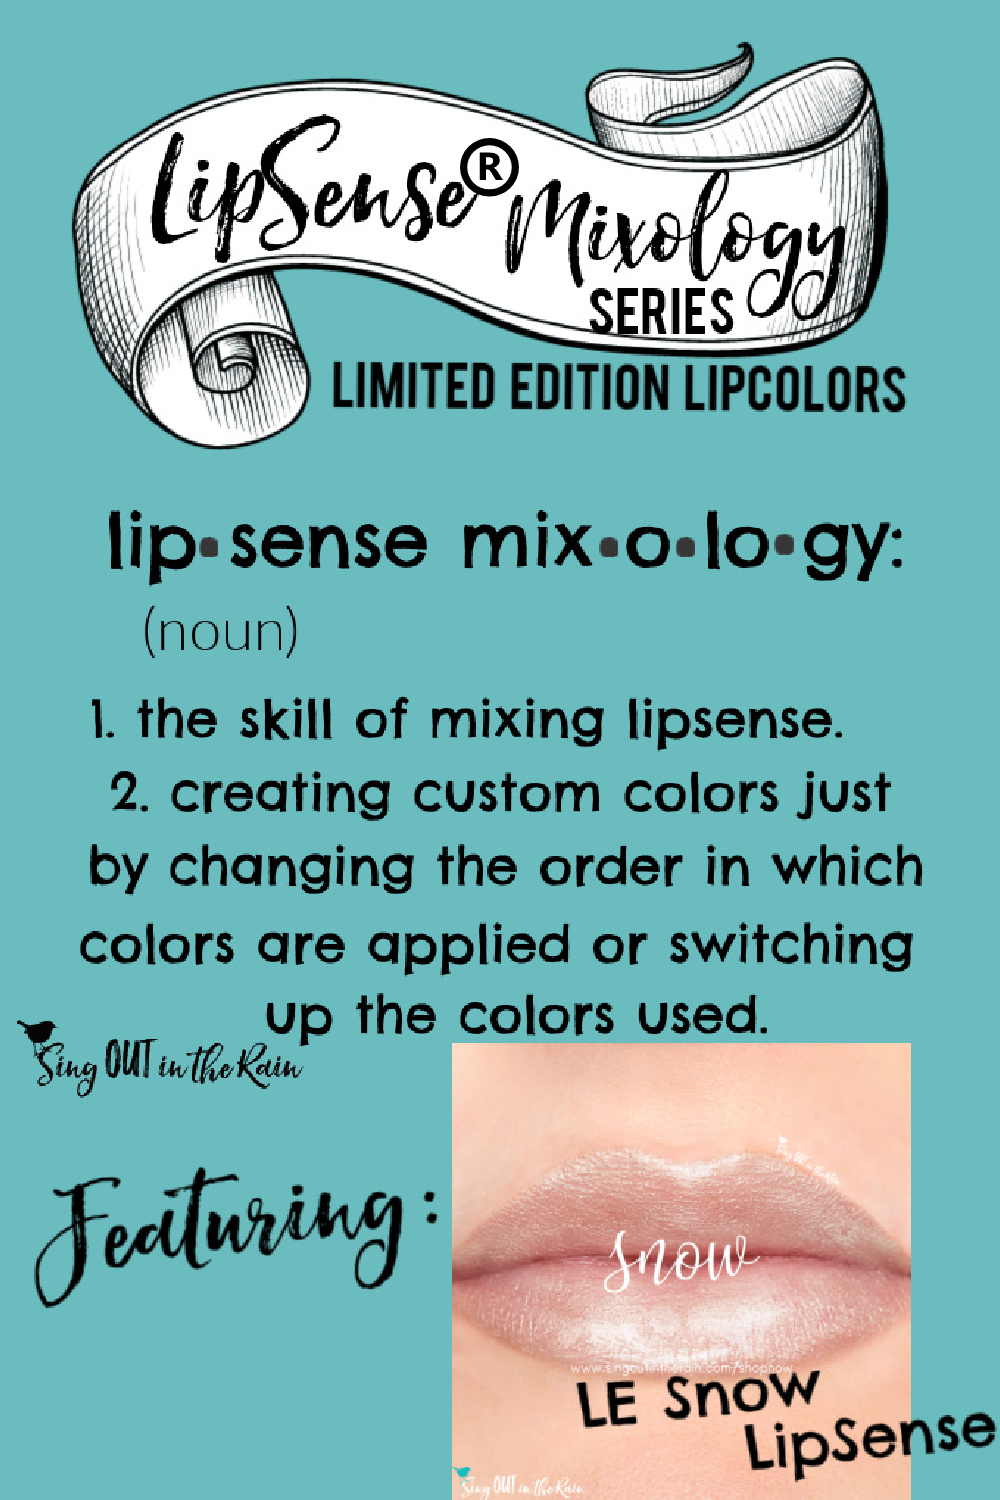 The Ultimate Guide to Snow LipSense Mixology